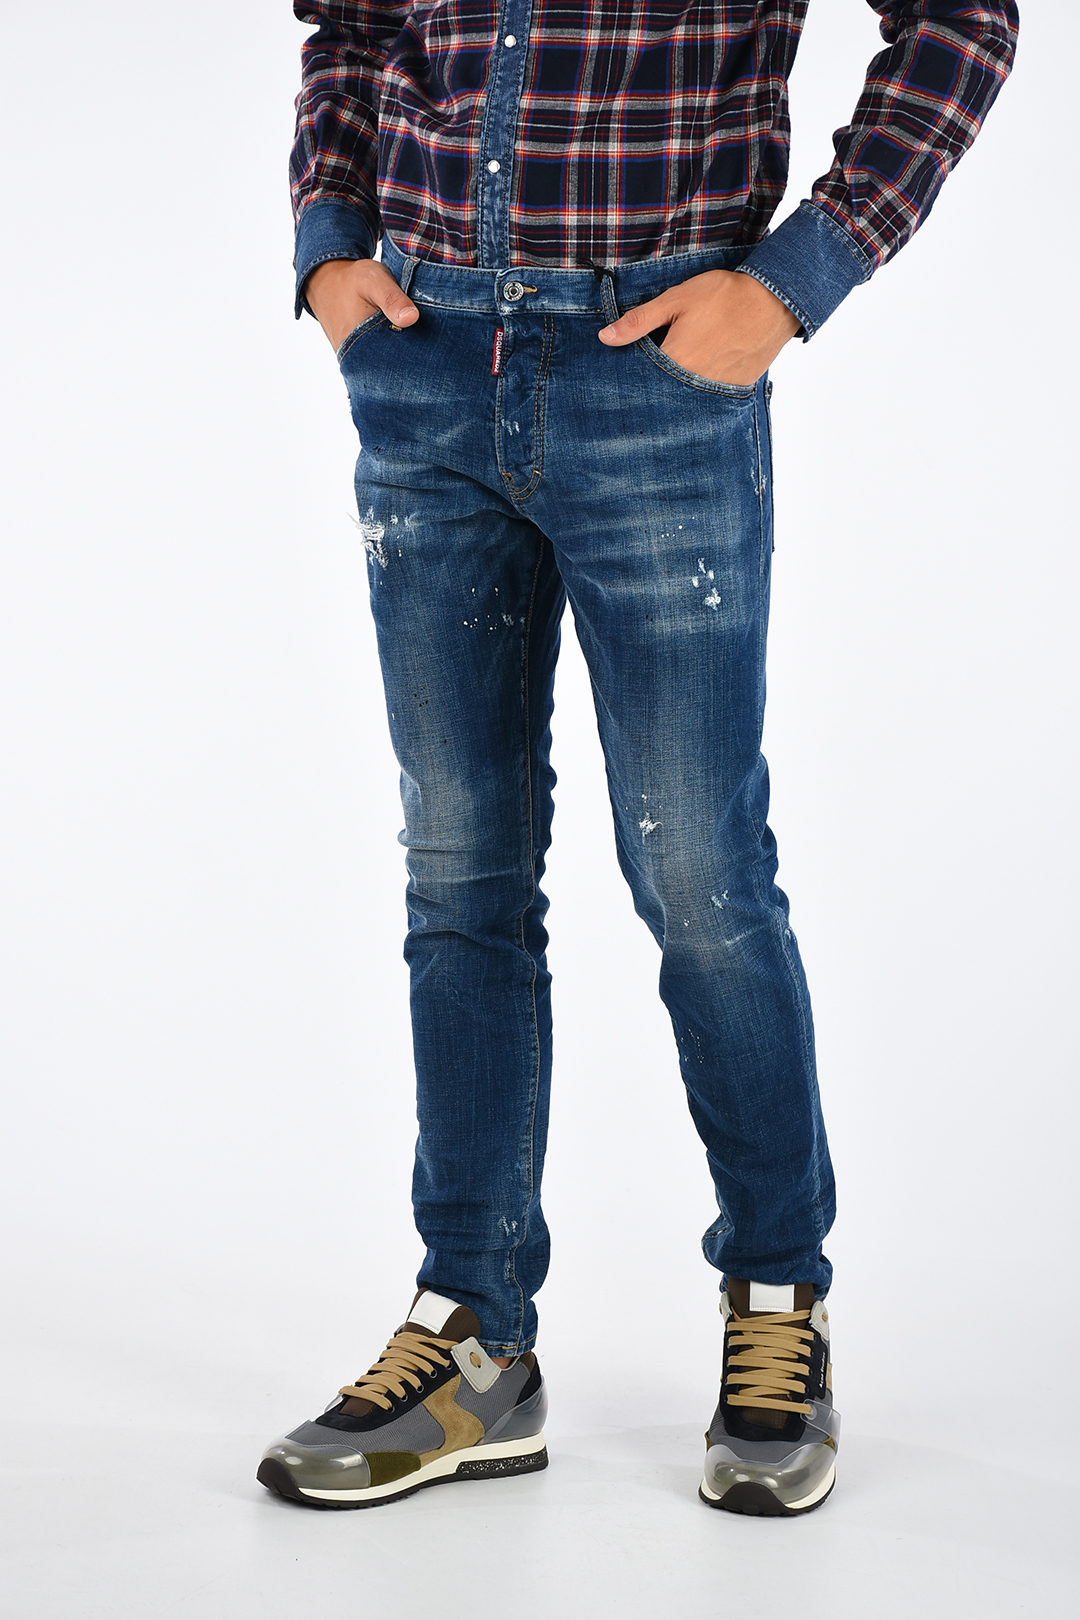 cool guy jeans